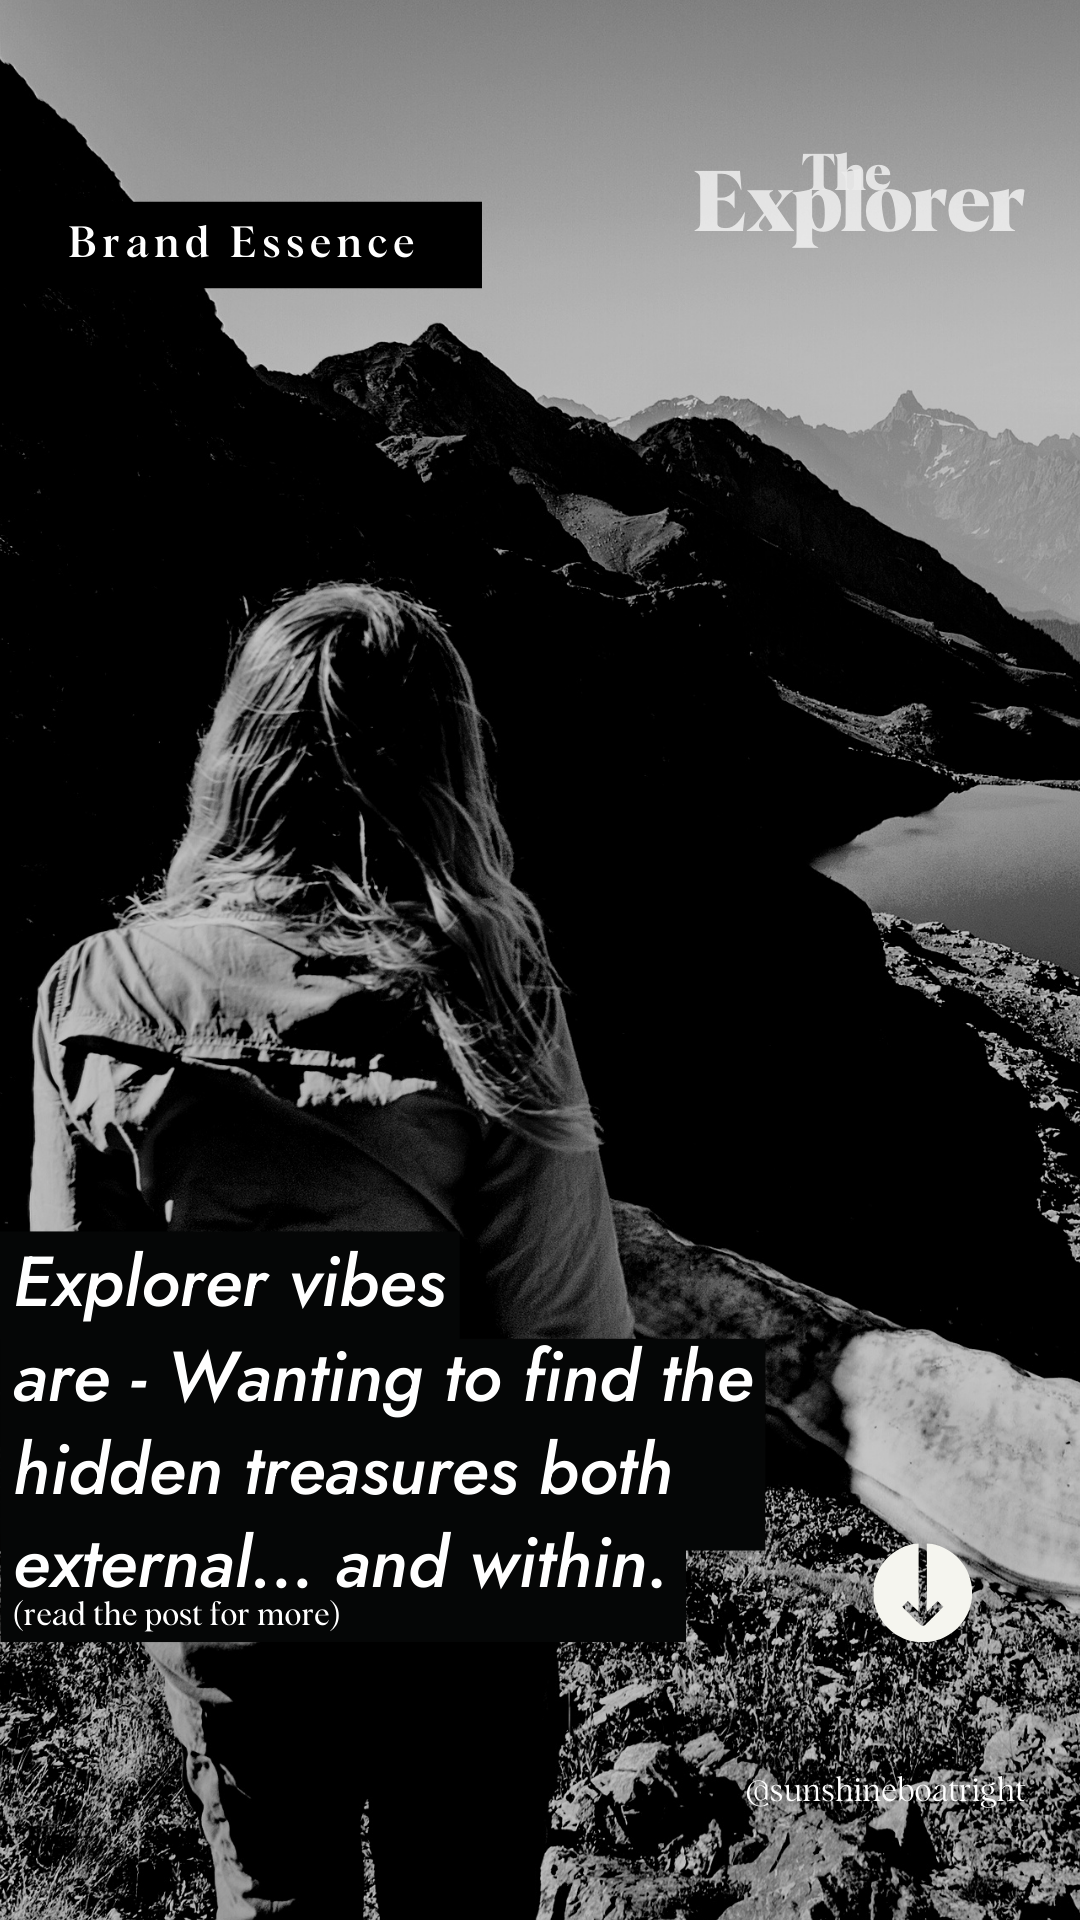 Brand Archetype Essence: Explorer vibes are wanting to find the hidden treasures both external and within